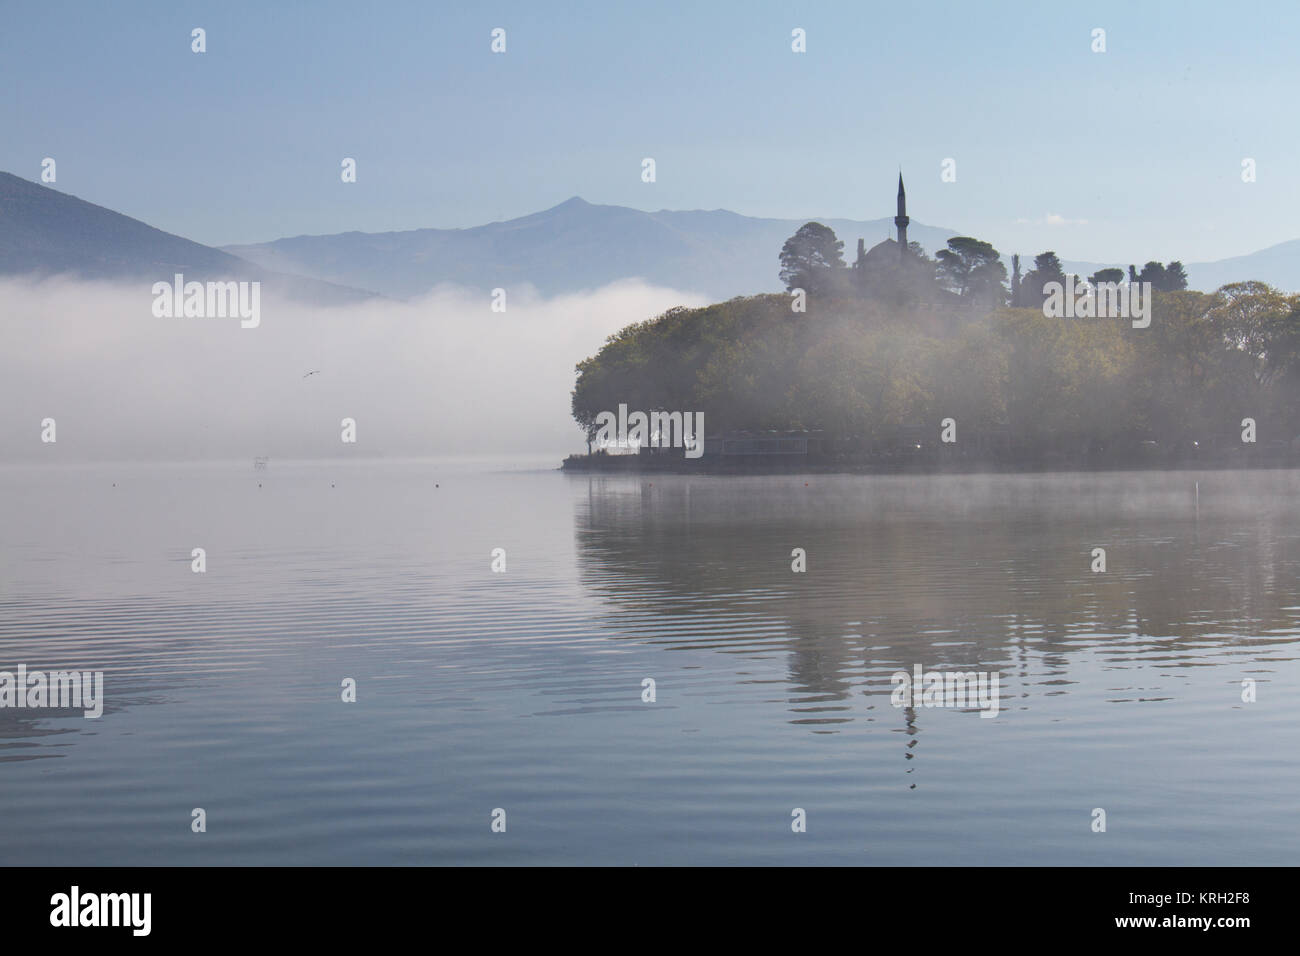 Atmospheric scene of Lake Pamvotis on a misty morning in Ioannina, Greece, with Aslan Pasha mosque in the background Stock Photo